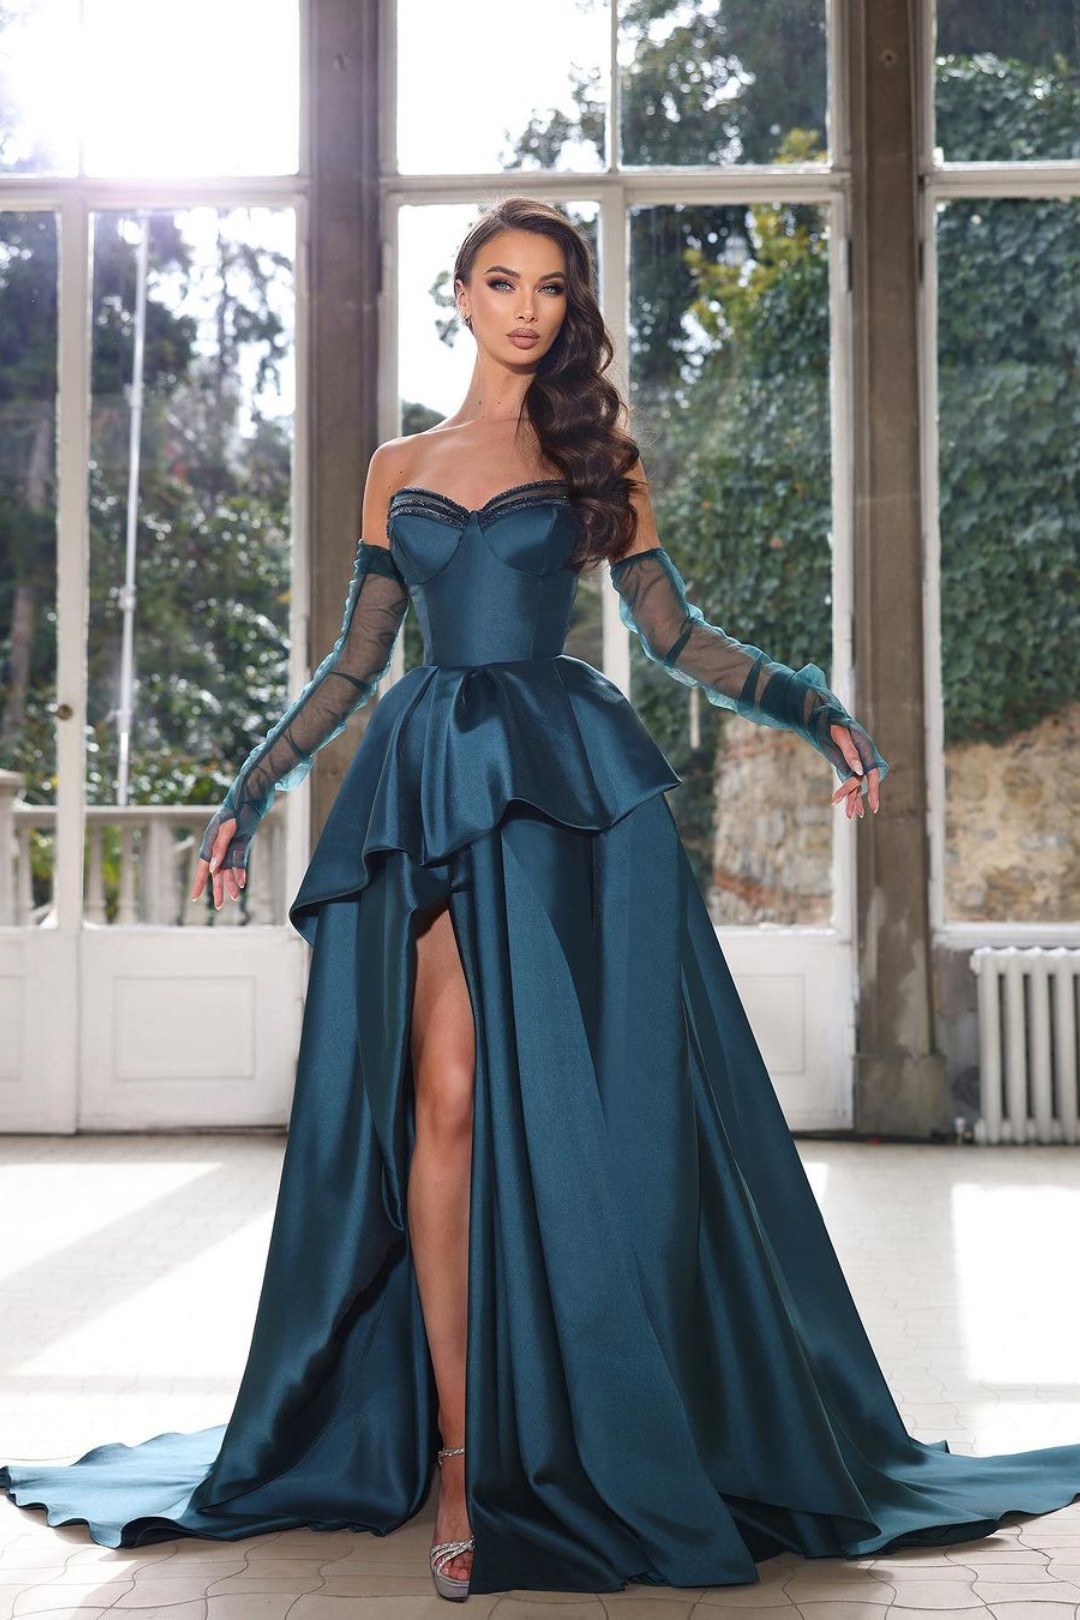 Glamorous Half Sleeves Ink Blue Prom Dress Strapless With High Slit Gown YL0287